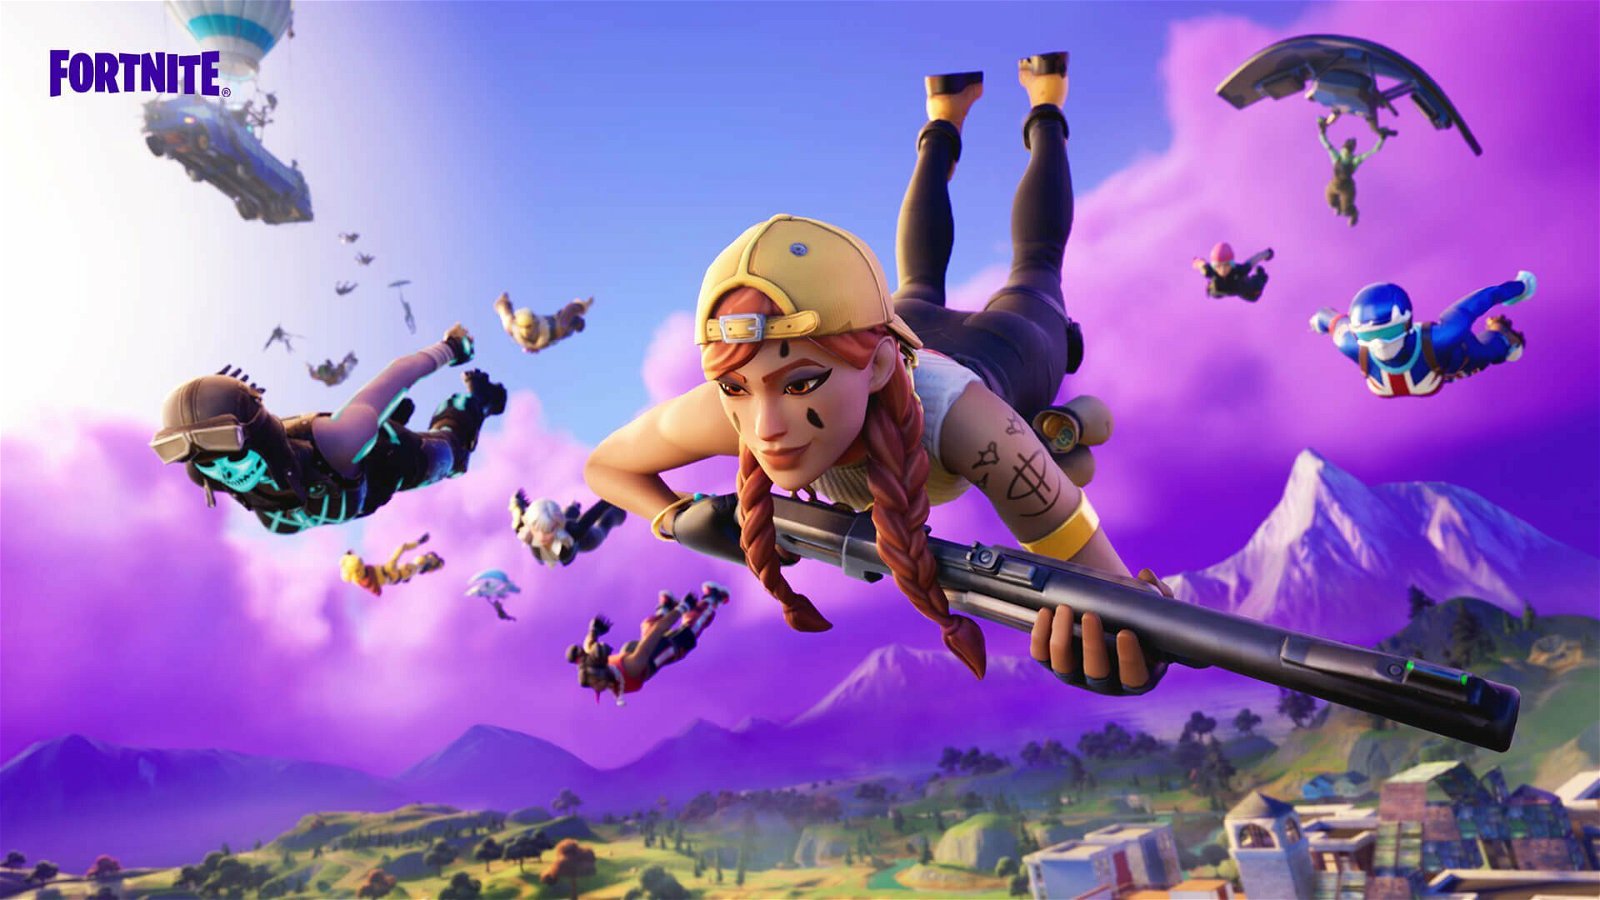 Fortnite Update 19.50: Potential Release Date and Everything We Know So Far